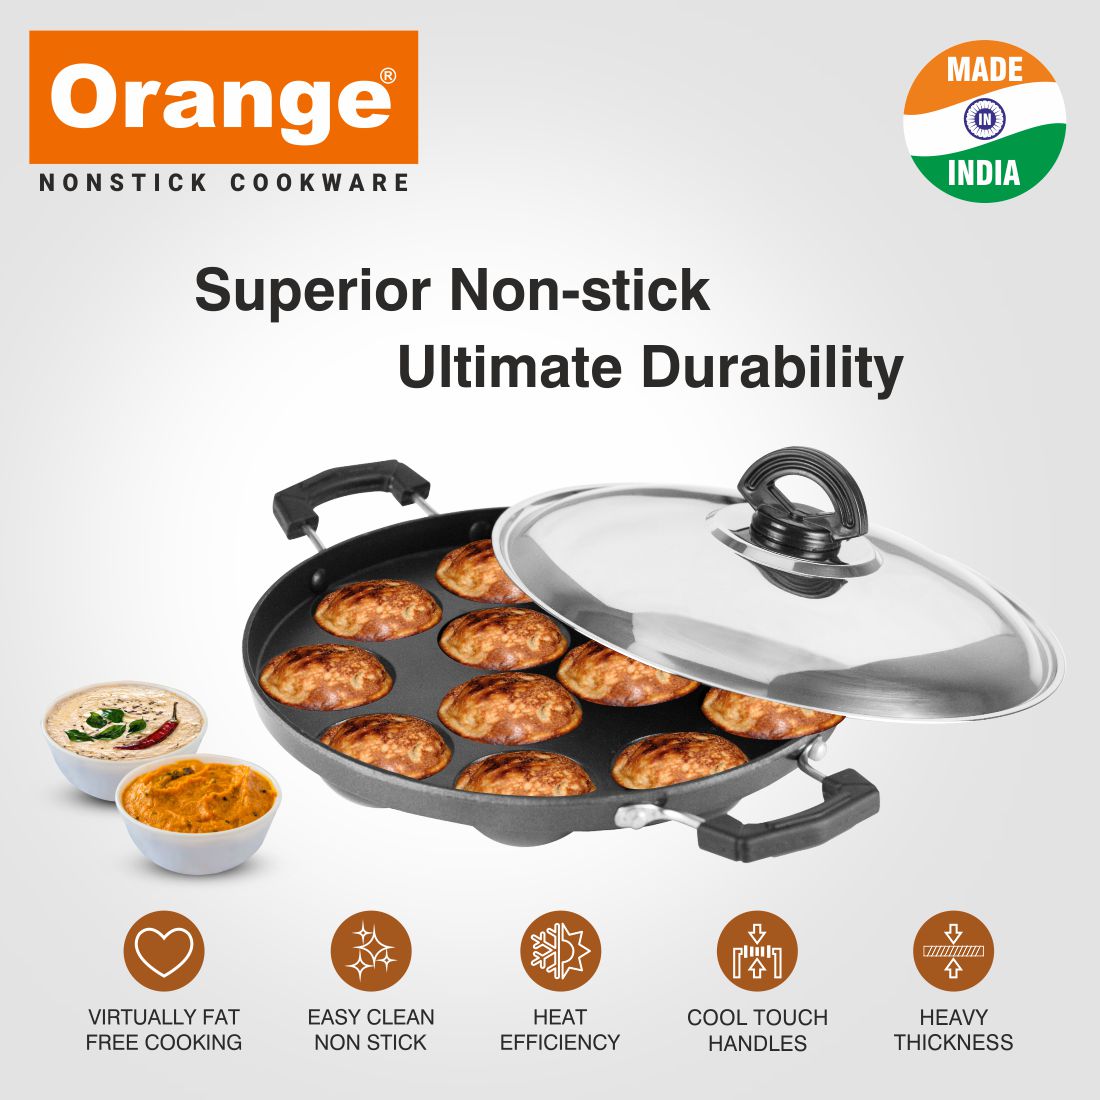 Orange Aluminium Die-cast Series Non-Stick Appam Maker with 12 Cavity/Bowls | Appam Pan/Paniyarakkal with Stainless Steel Lid and Side Cool Touch Handles